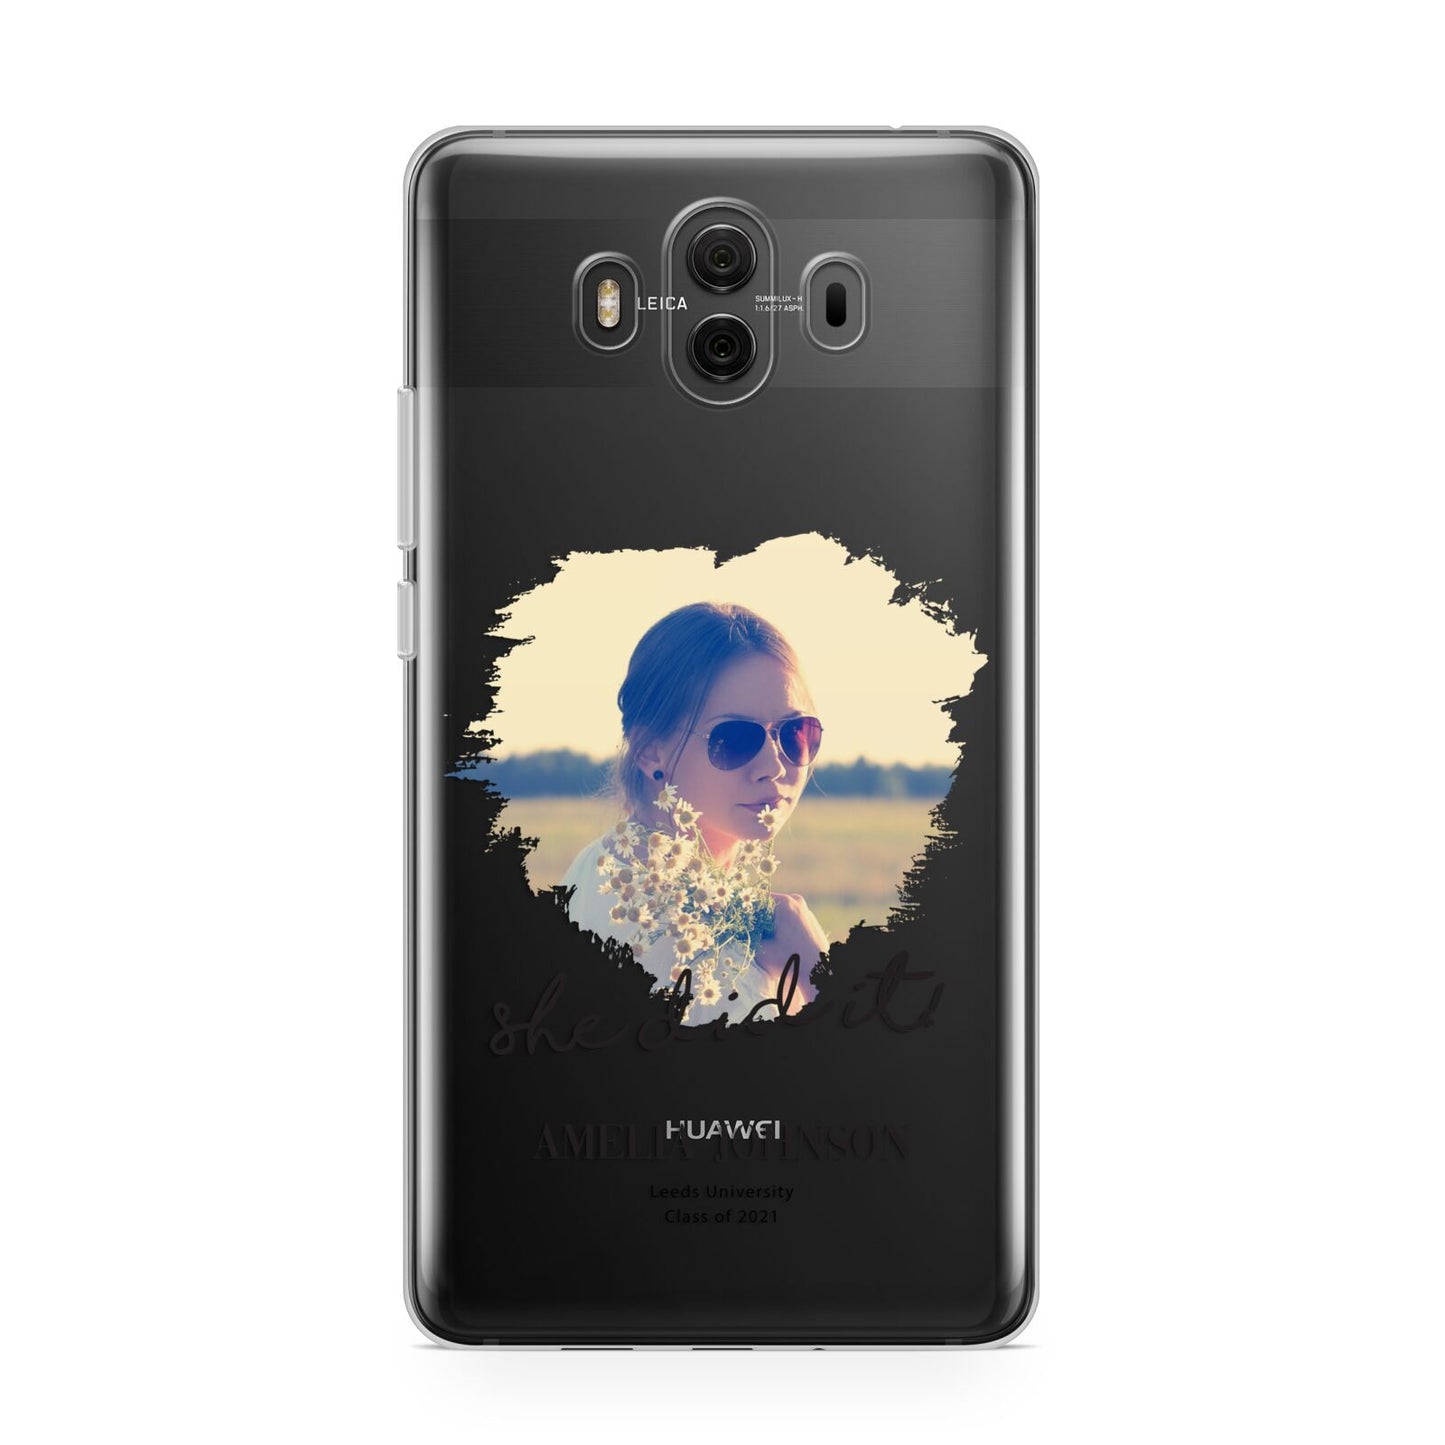 She Did It Graduation Photo with Name Huawei Mate 10 Protective Phone Case